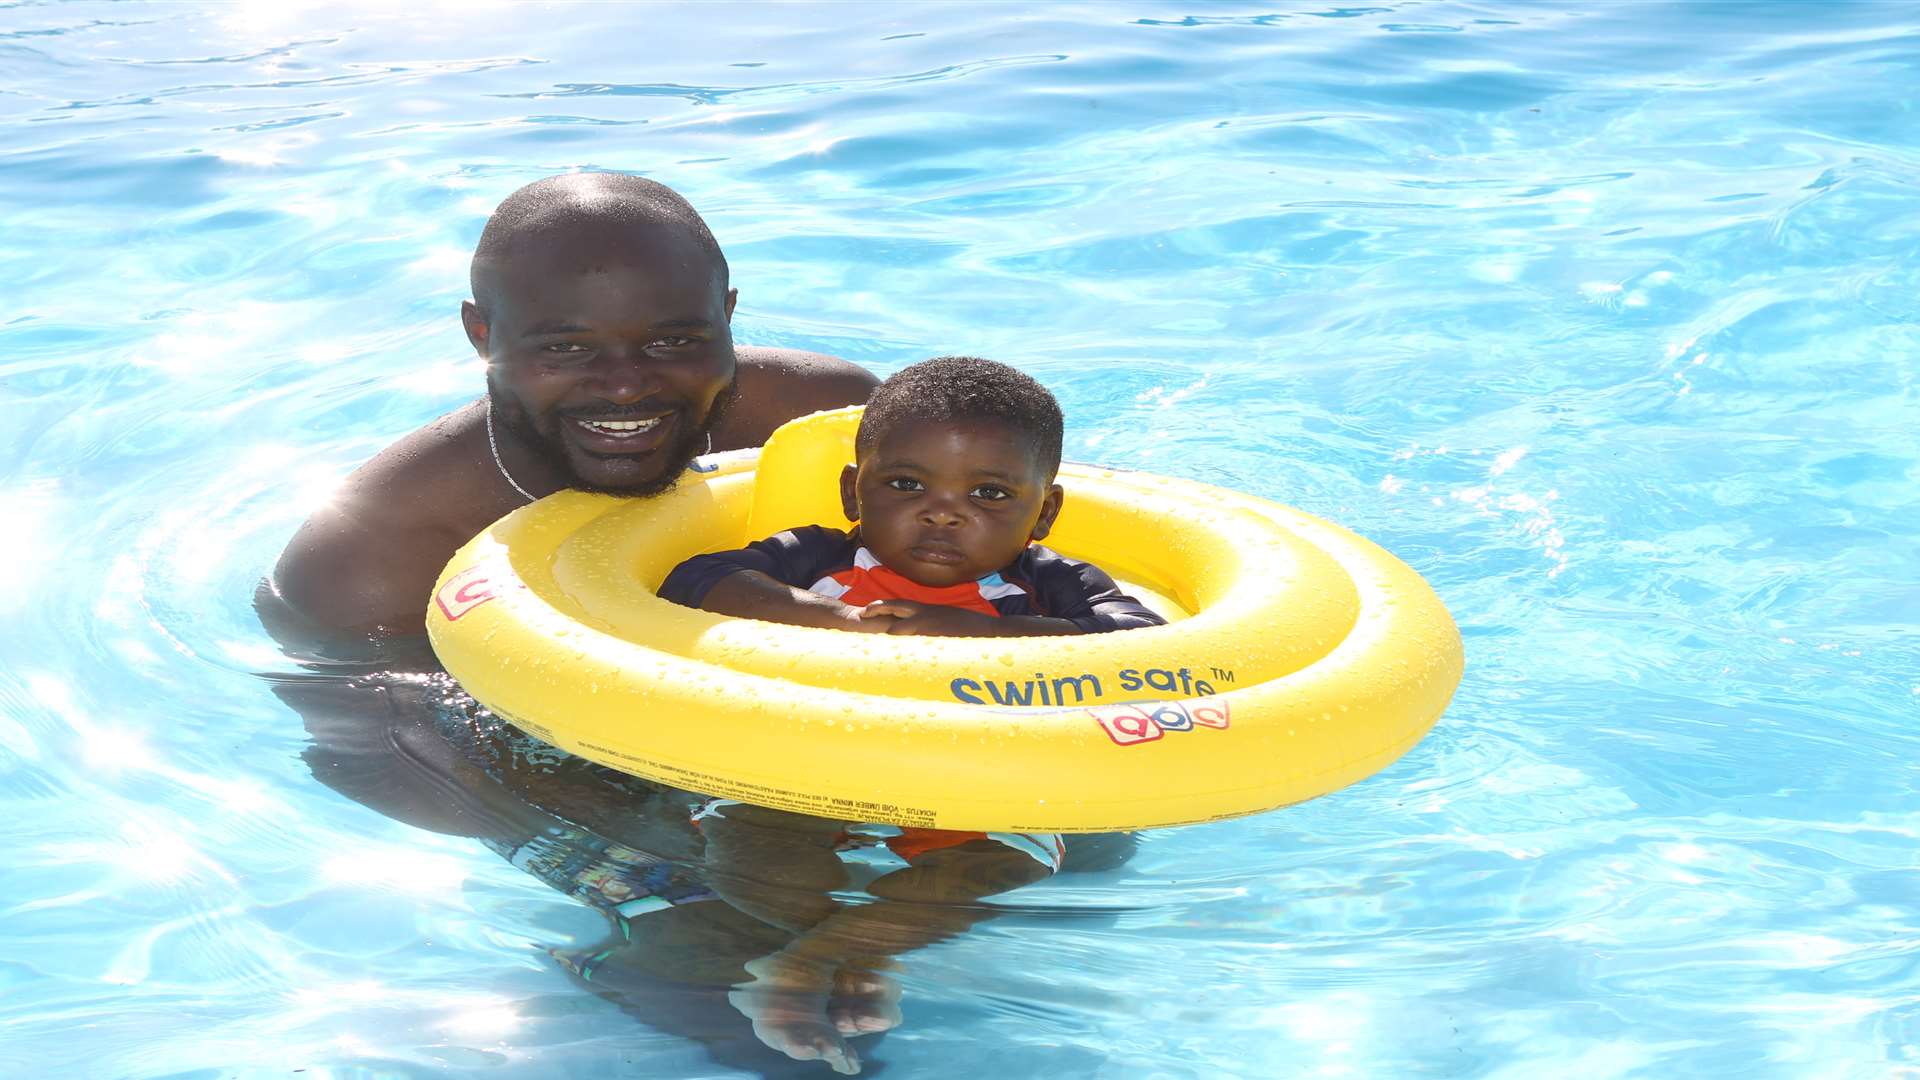 Mino Acho with his son Banue, 14 months